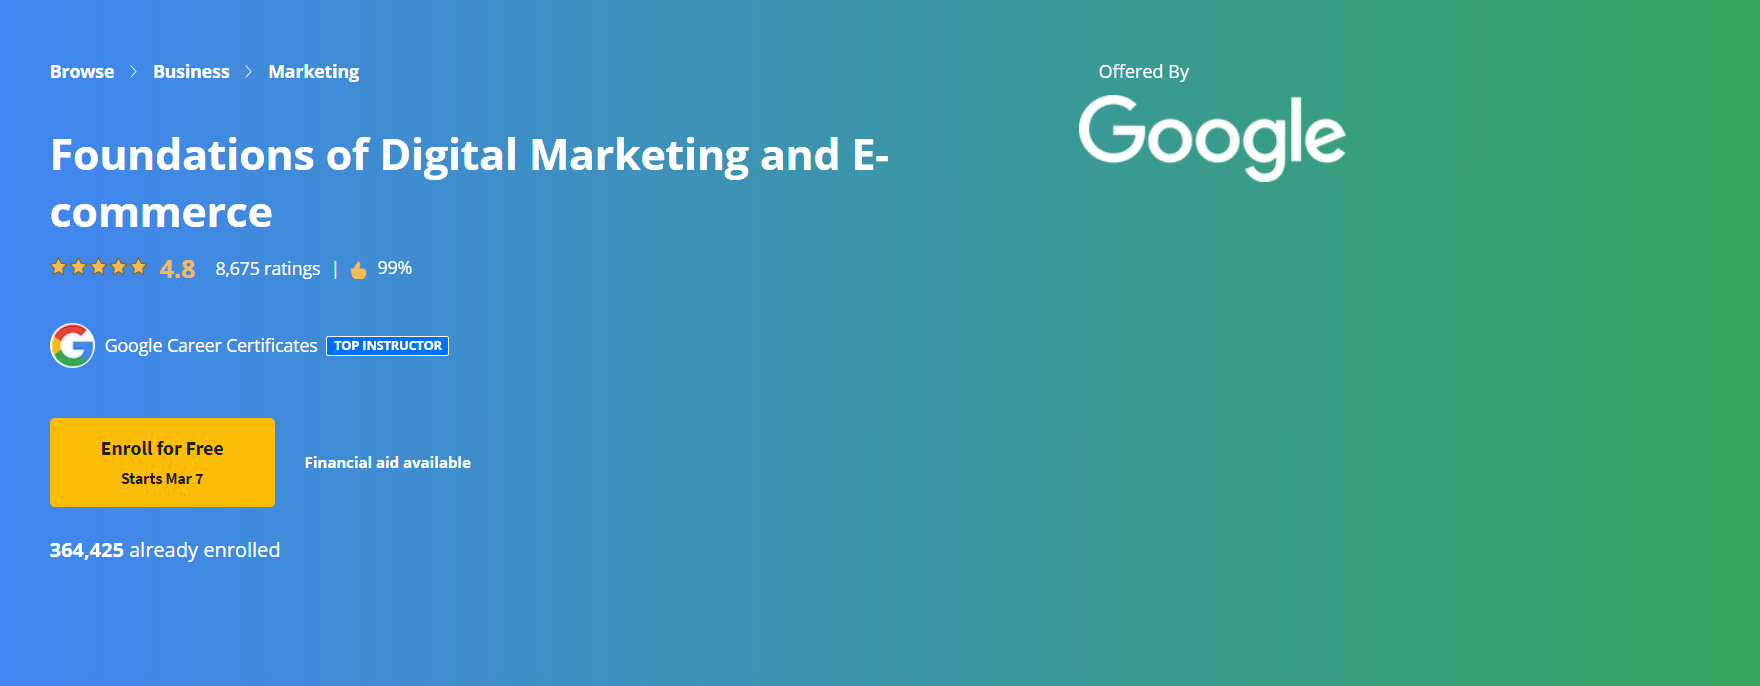 Foundations of Digital Marketing Course and E-commerce